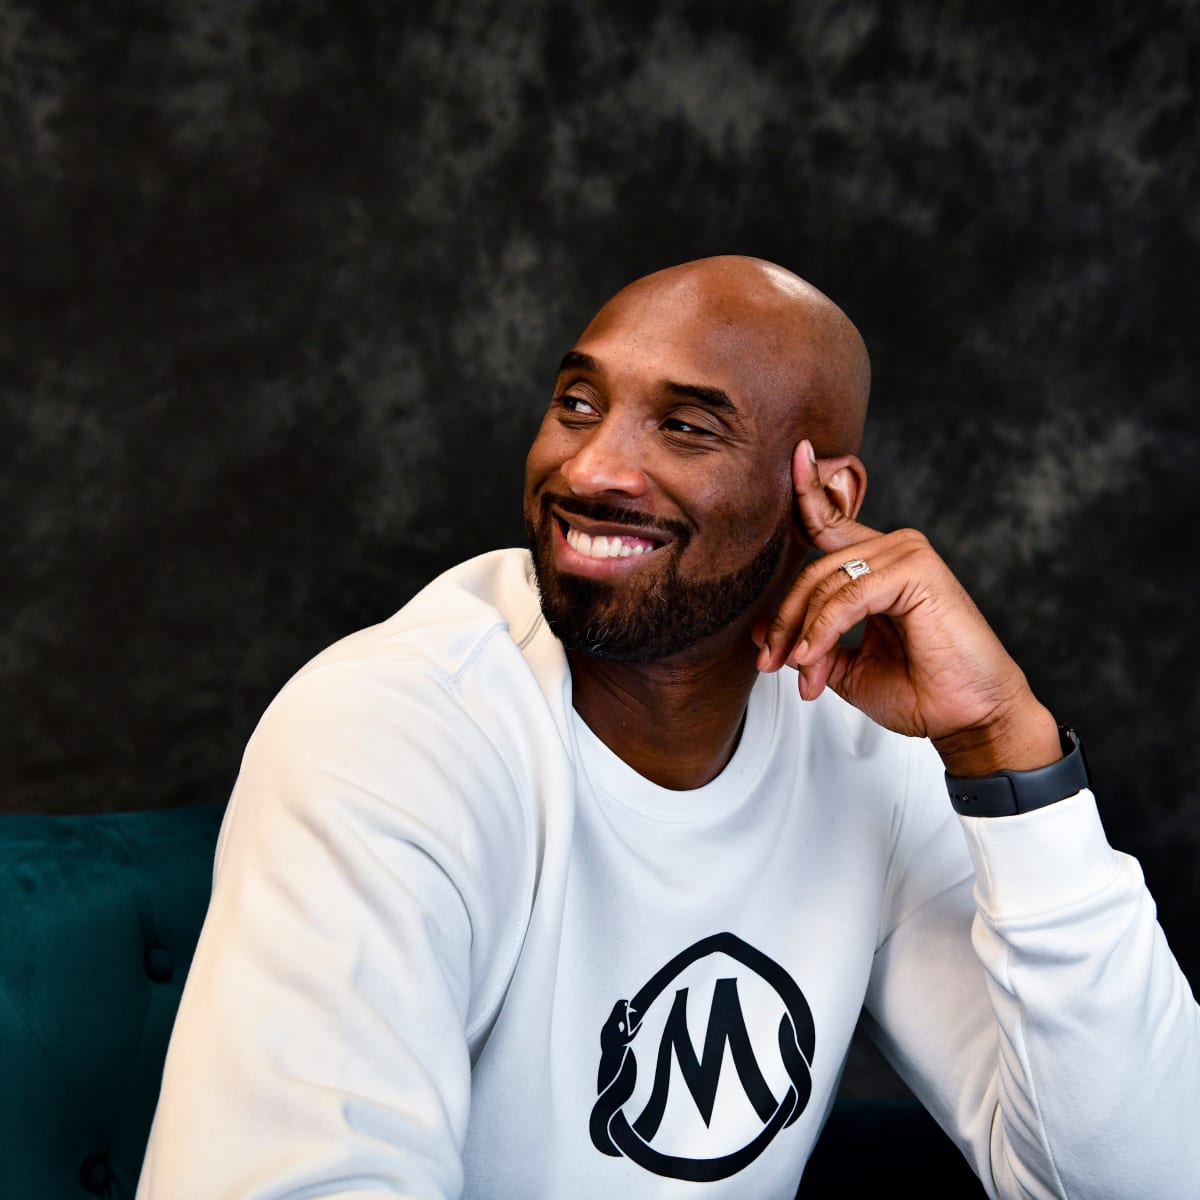 Light Meeting needle Lakers News: Journalist Explains Time Kobe Bryant Showed How Spiteful He  Was with Adidas - All Lakers | News, Rumors, Videos, Schedule, Roster,  Salaries And More